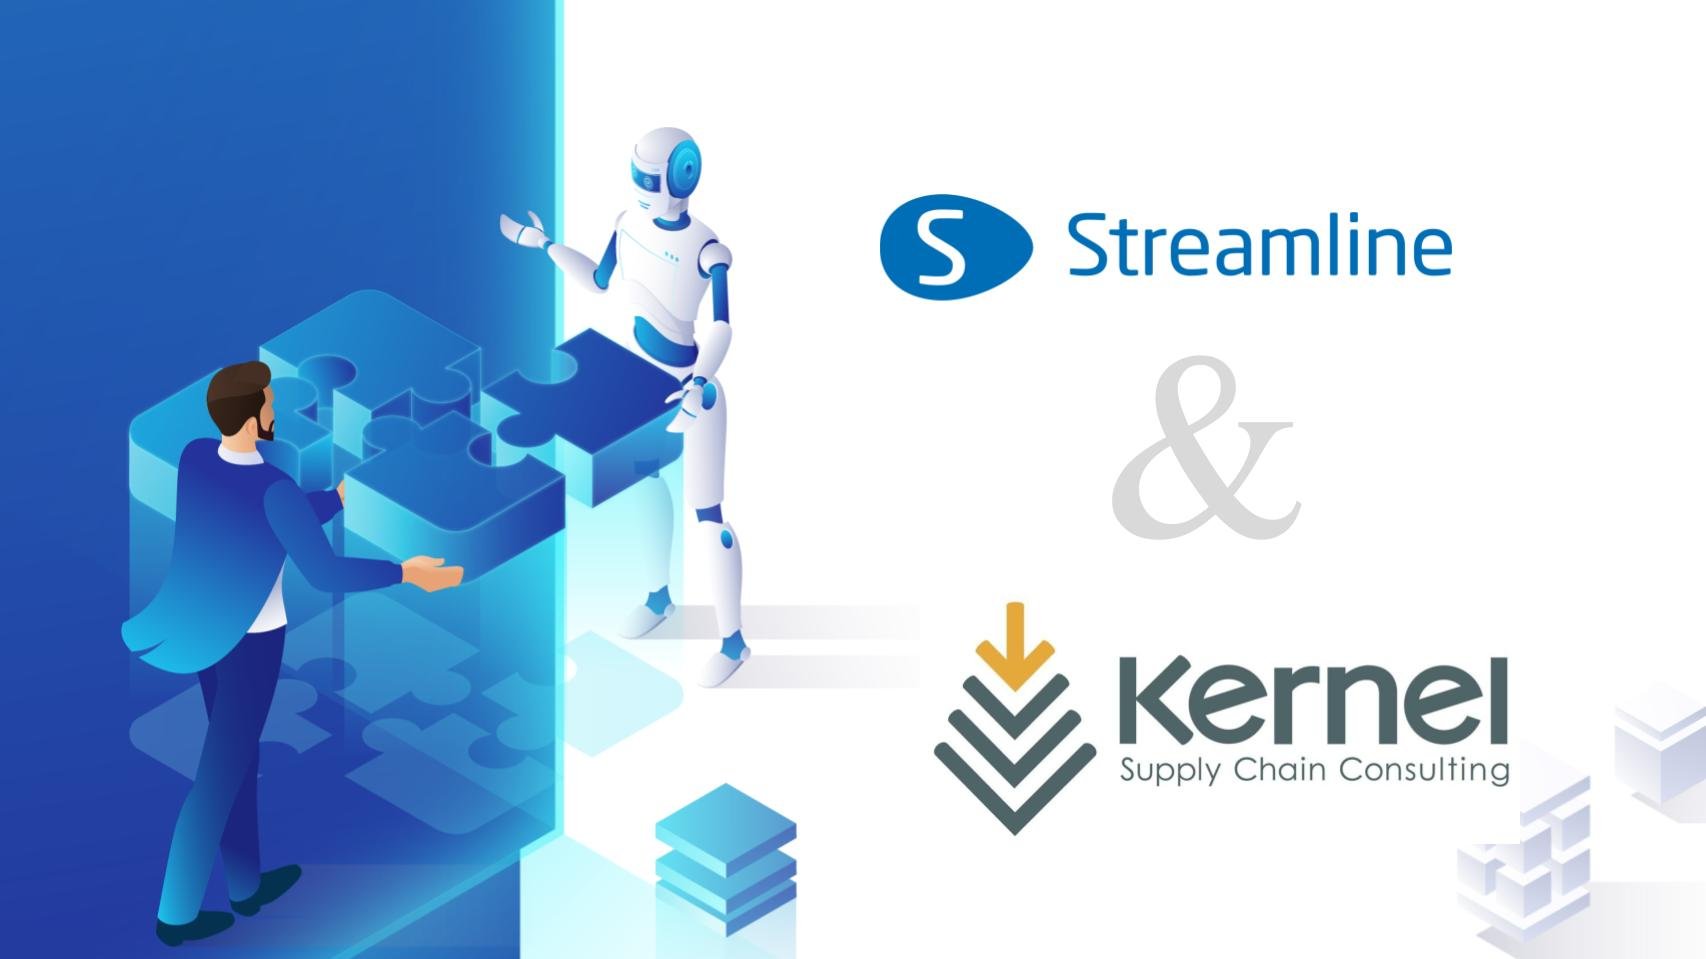 GMDH Streamline and Kernel Supply Chain Consulting announce a valuable partnership